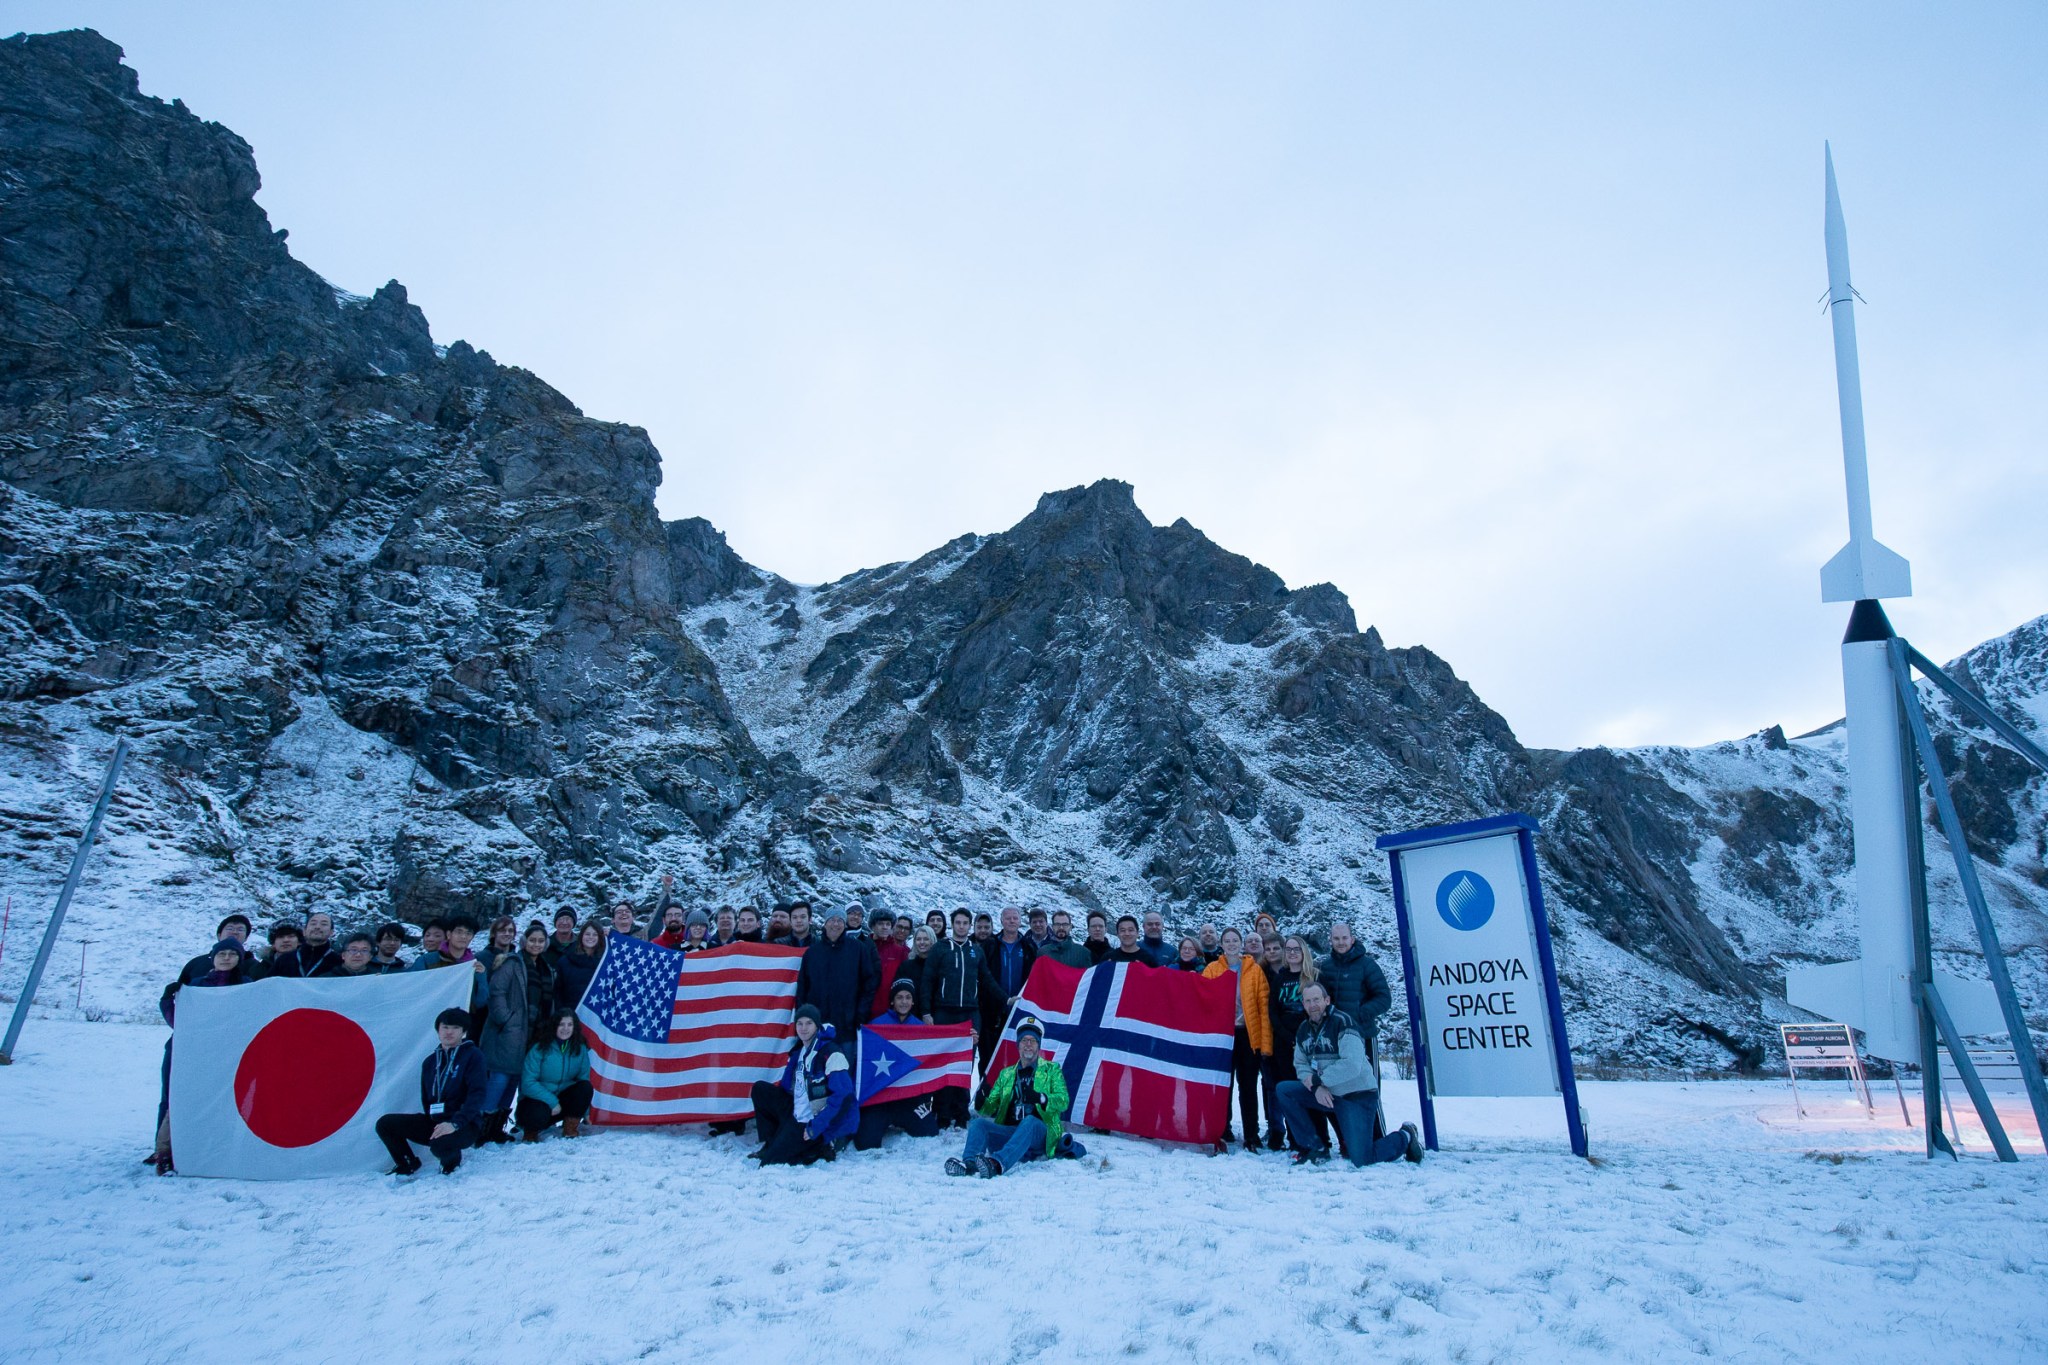 G-CHASER student teams at the Andøya Space Center. Several people bundled in winter clothes stand and sit in a group in the snow. Behind them, mountains have patches of snow. The people are in a snowy field holding various flags.